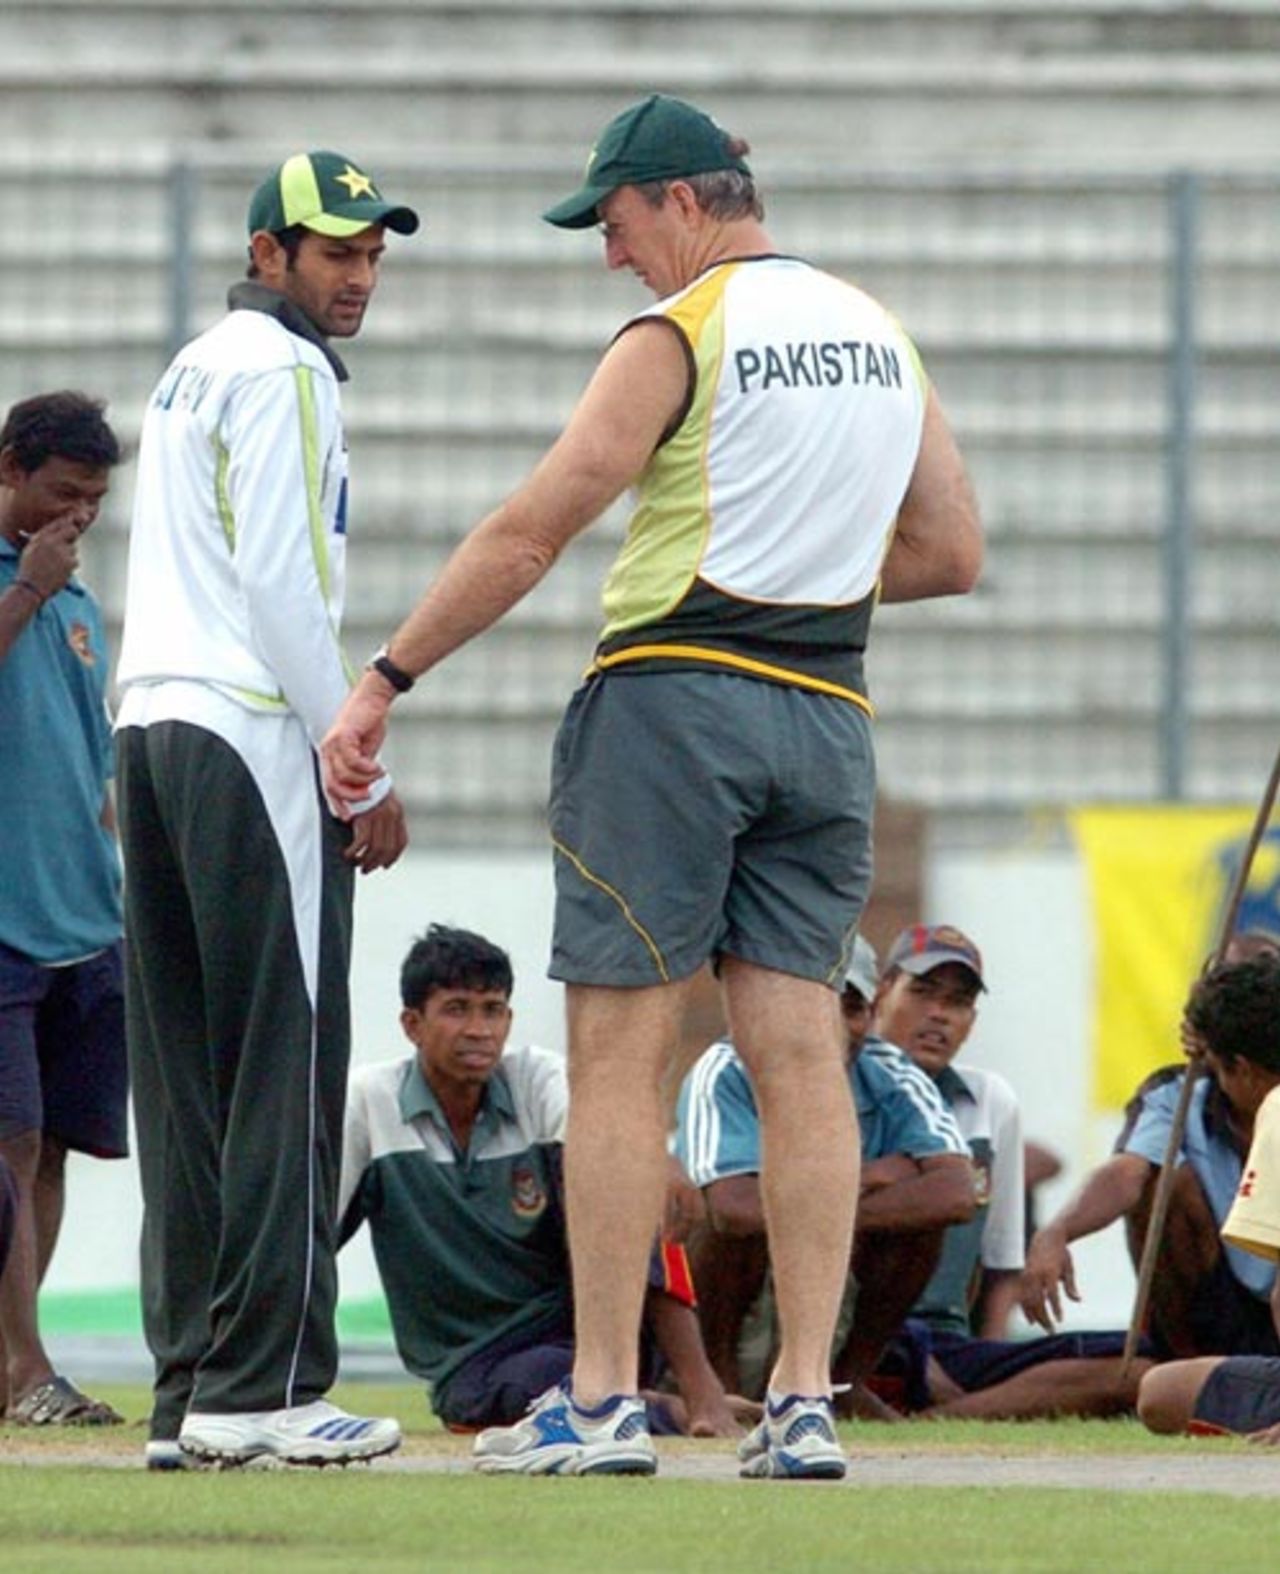 Geoff Lawson and Shoaib Malik examine the pitch during training, Kitply Cup, Mirpur, June 7, 2008